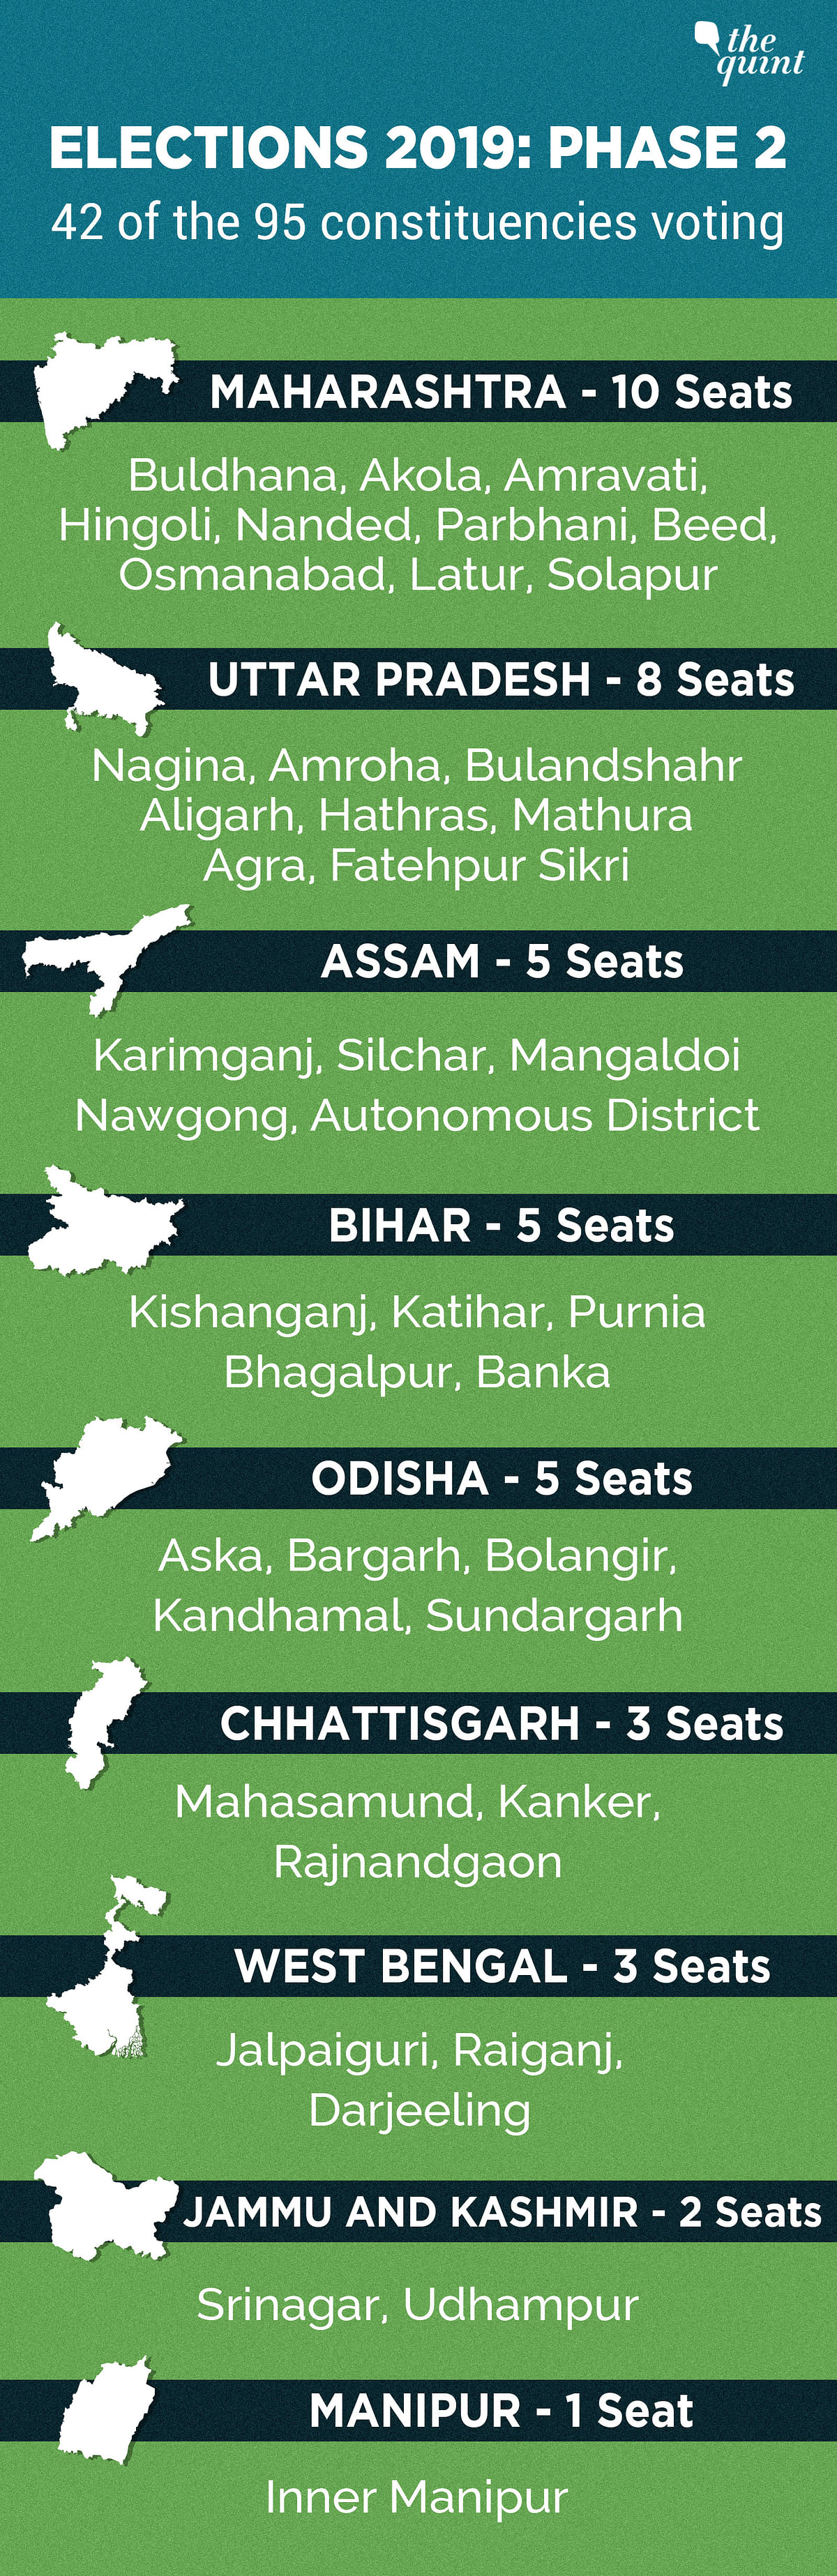 Voting will take place in 11 states and one Union Territory.